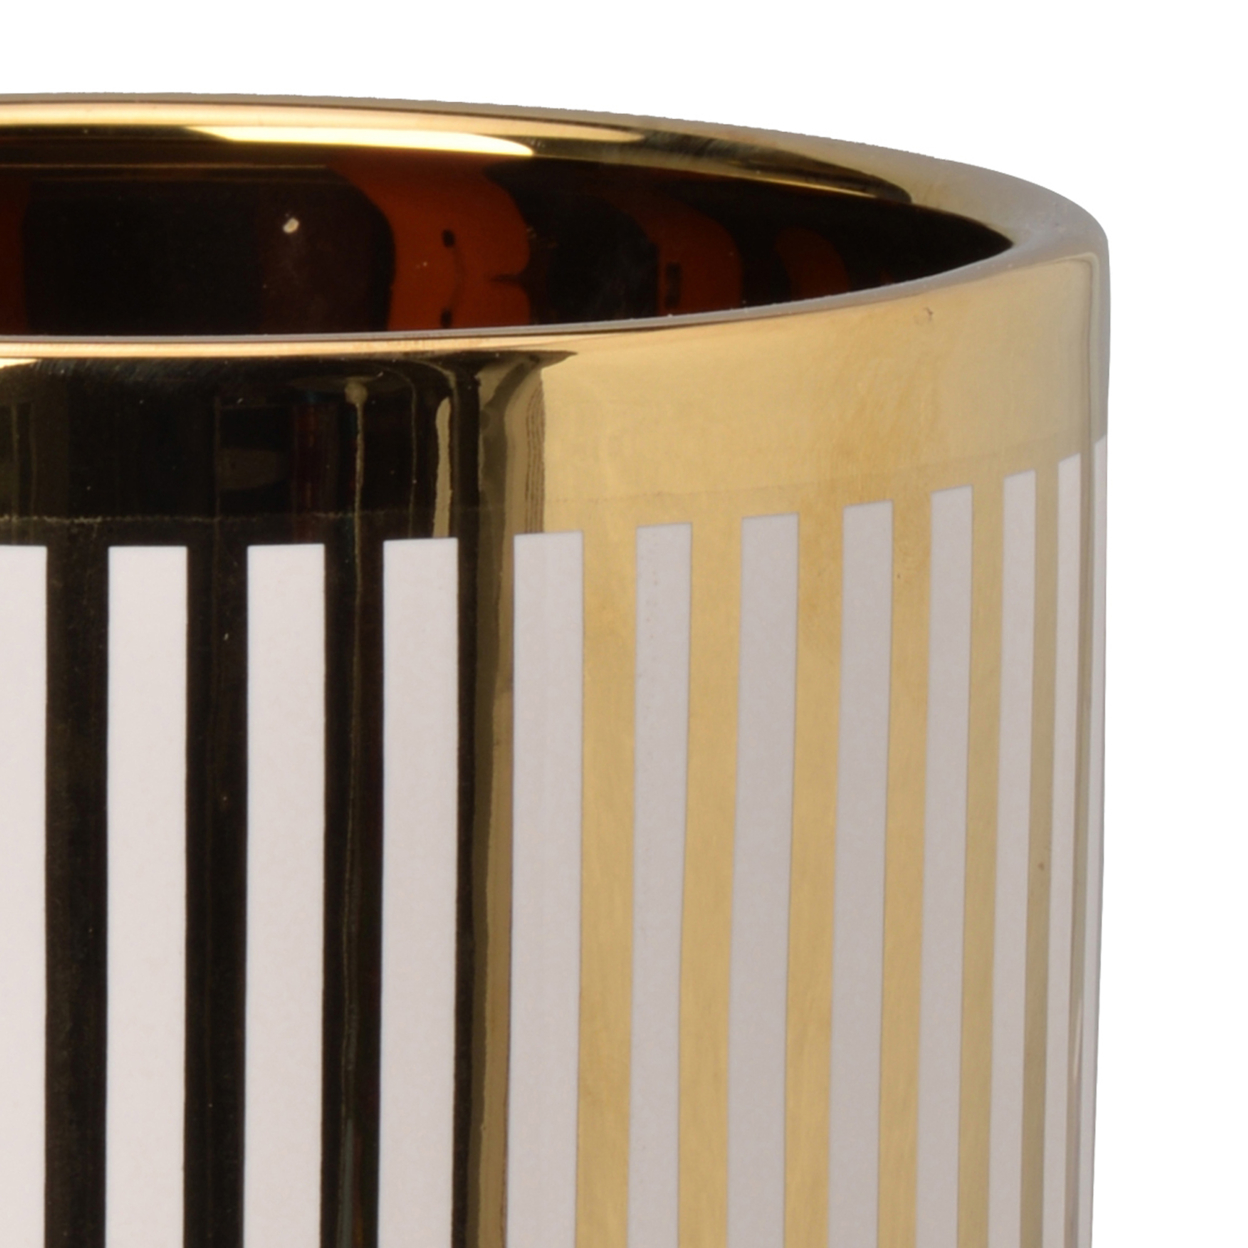 Ceramic Cylindrical Planter With Strips Pattern, White And Gold- Saltoro Sherpi